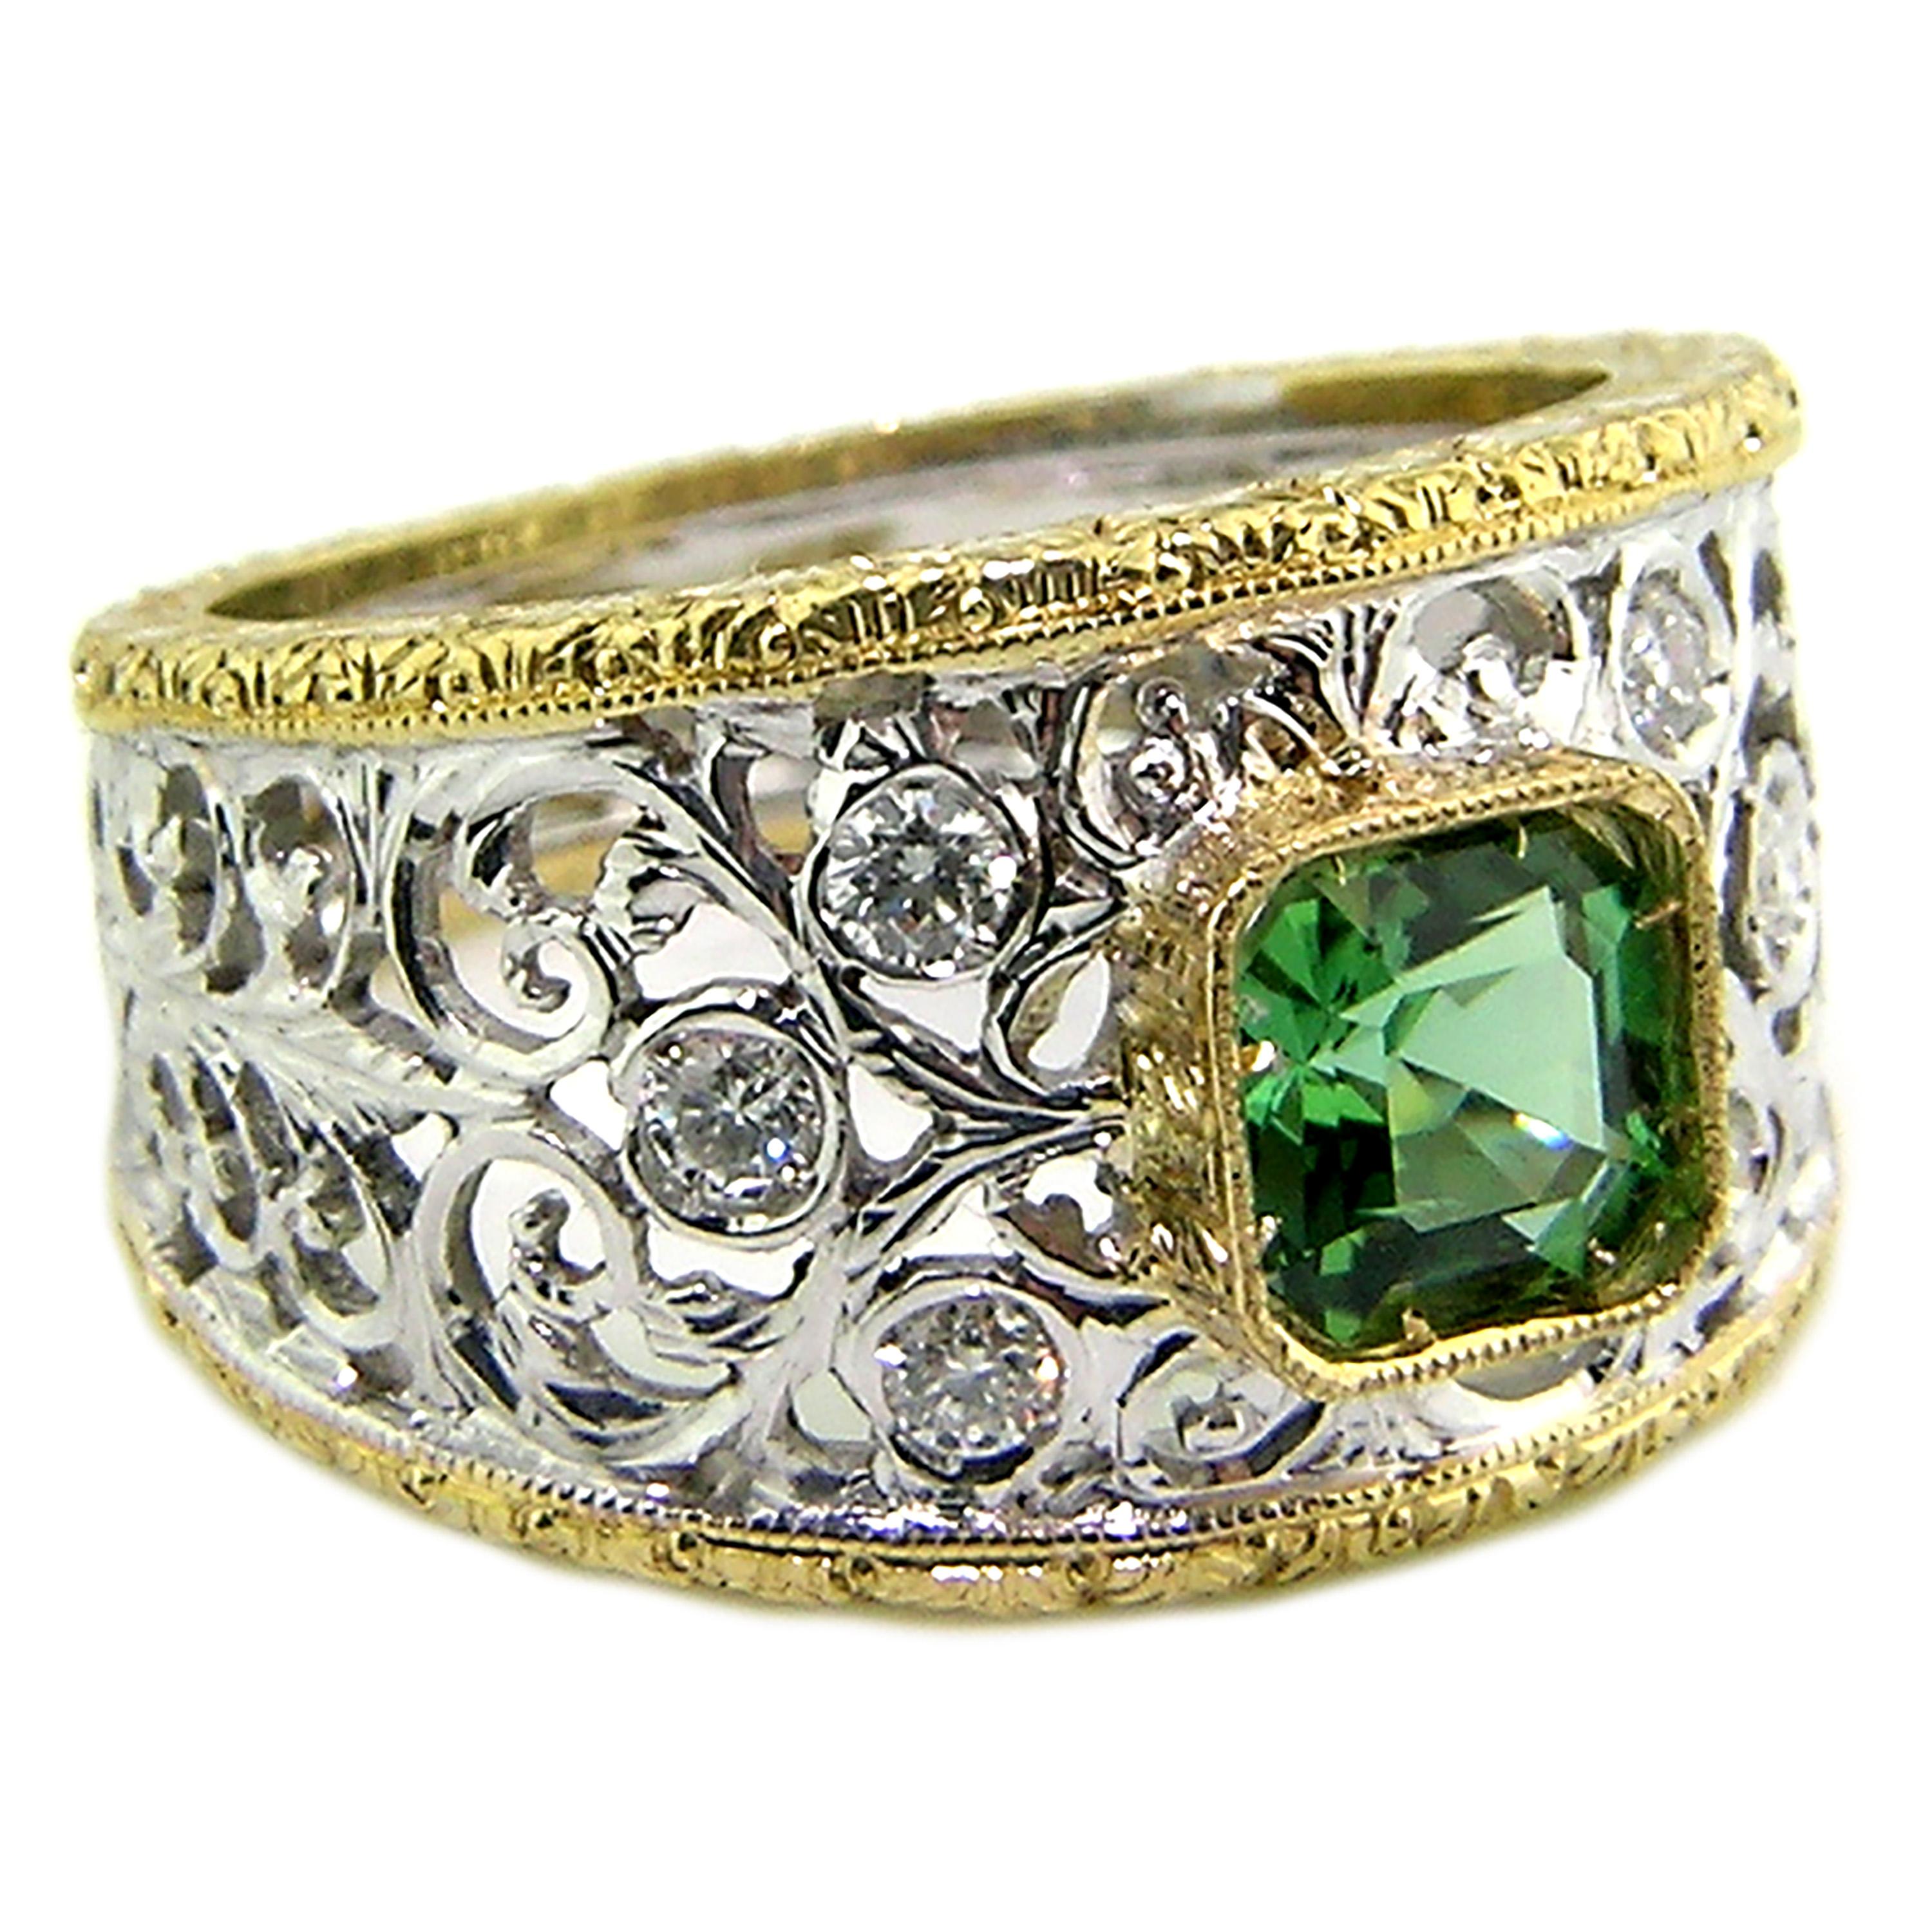 The Contessa ring is the perfect frame for this bright and lively Ascher-cut green tourmaline. This tourmaline is simply the greenest green, and the big look of this small gem is amazing in person.

This 18kt ring is accented with six fine diamonds.